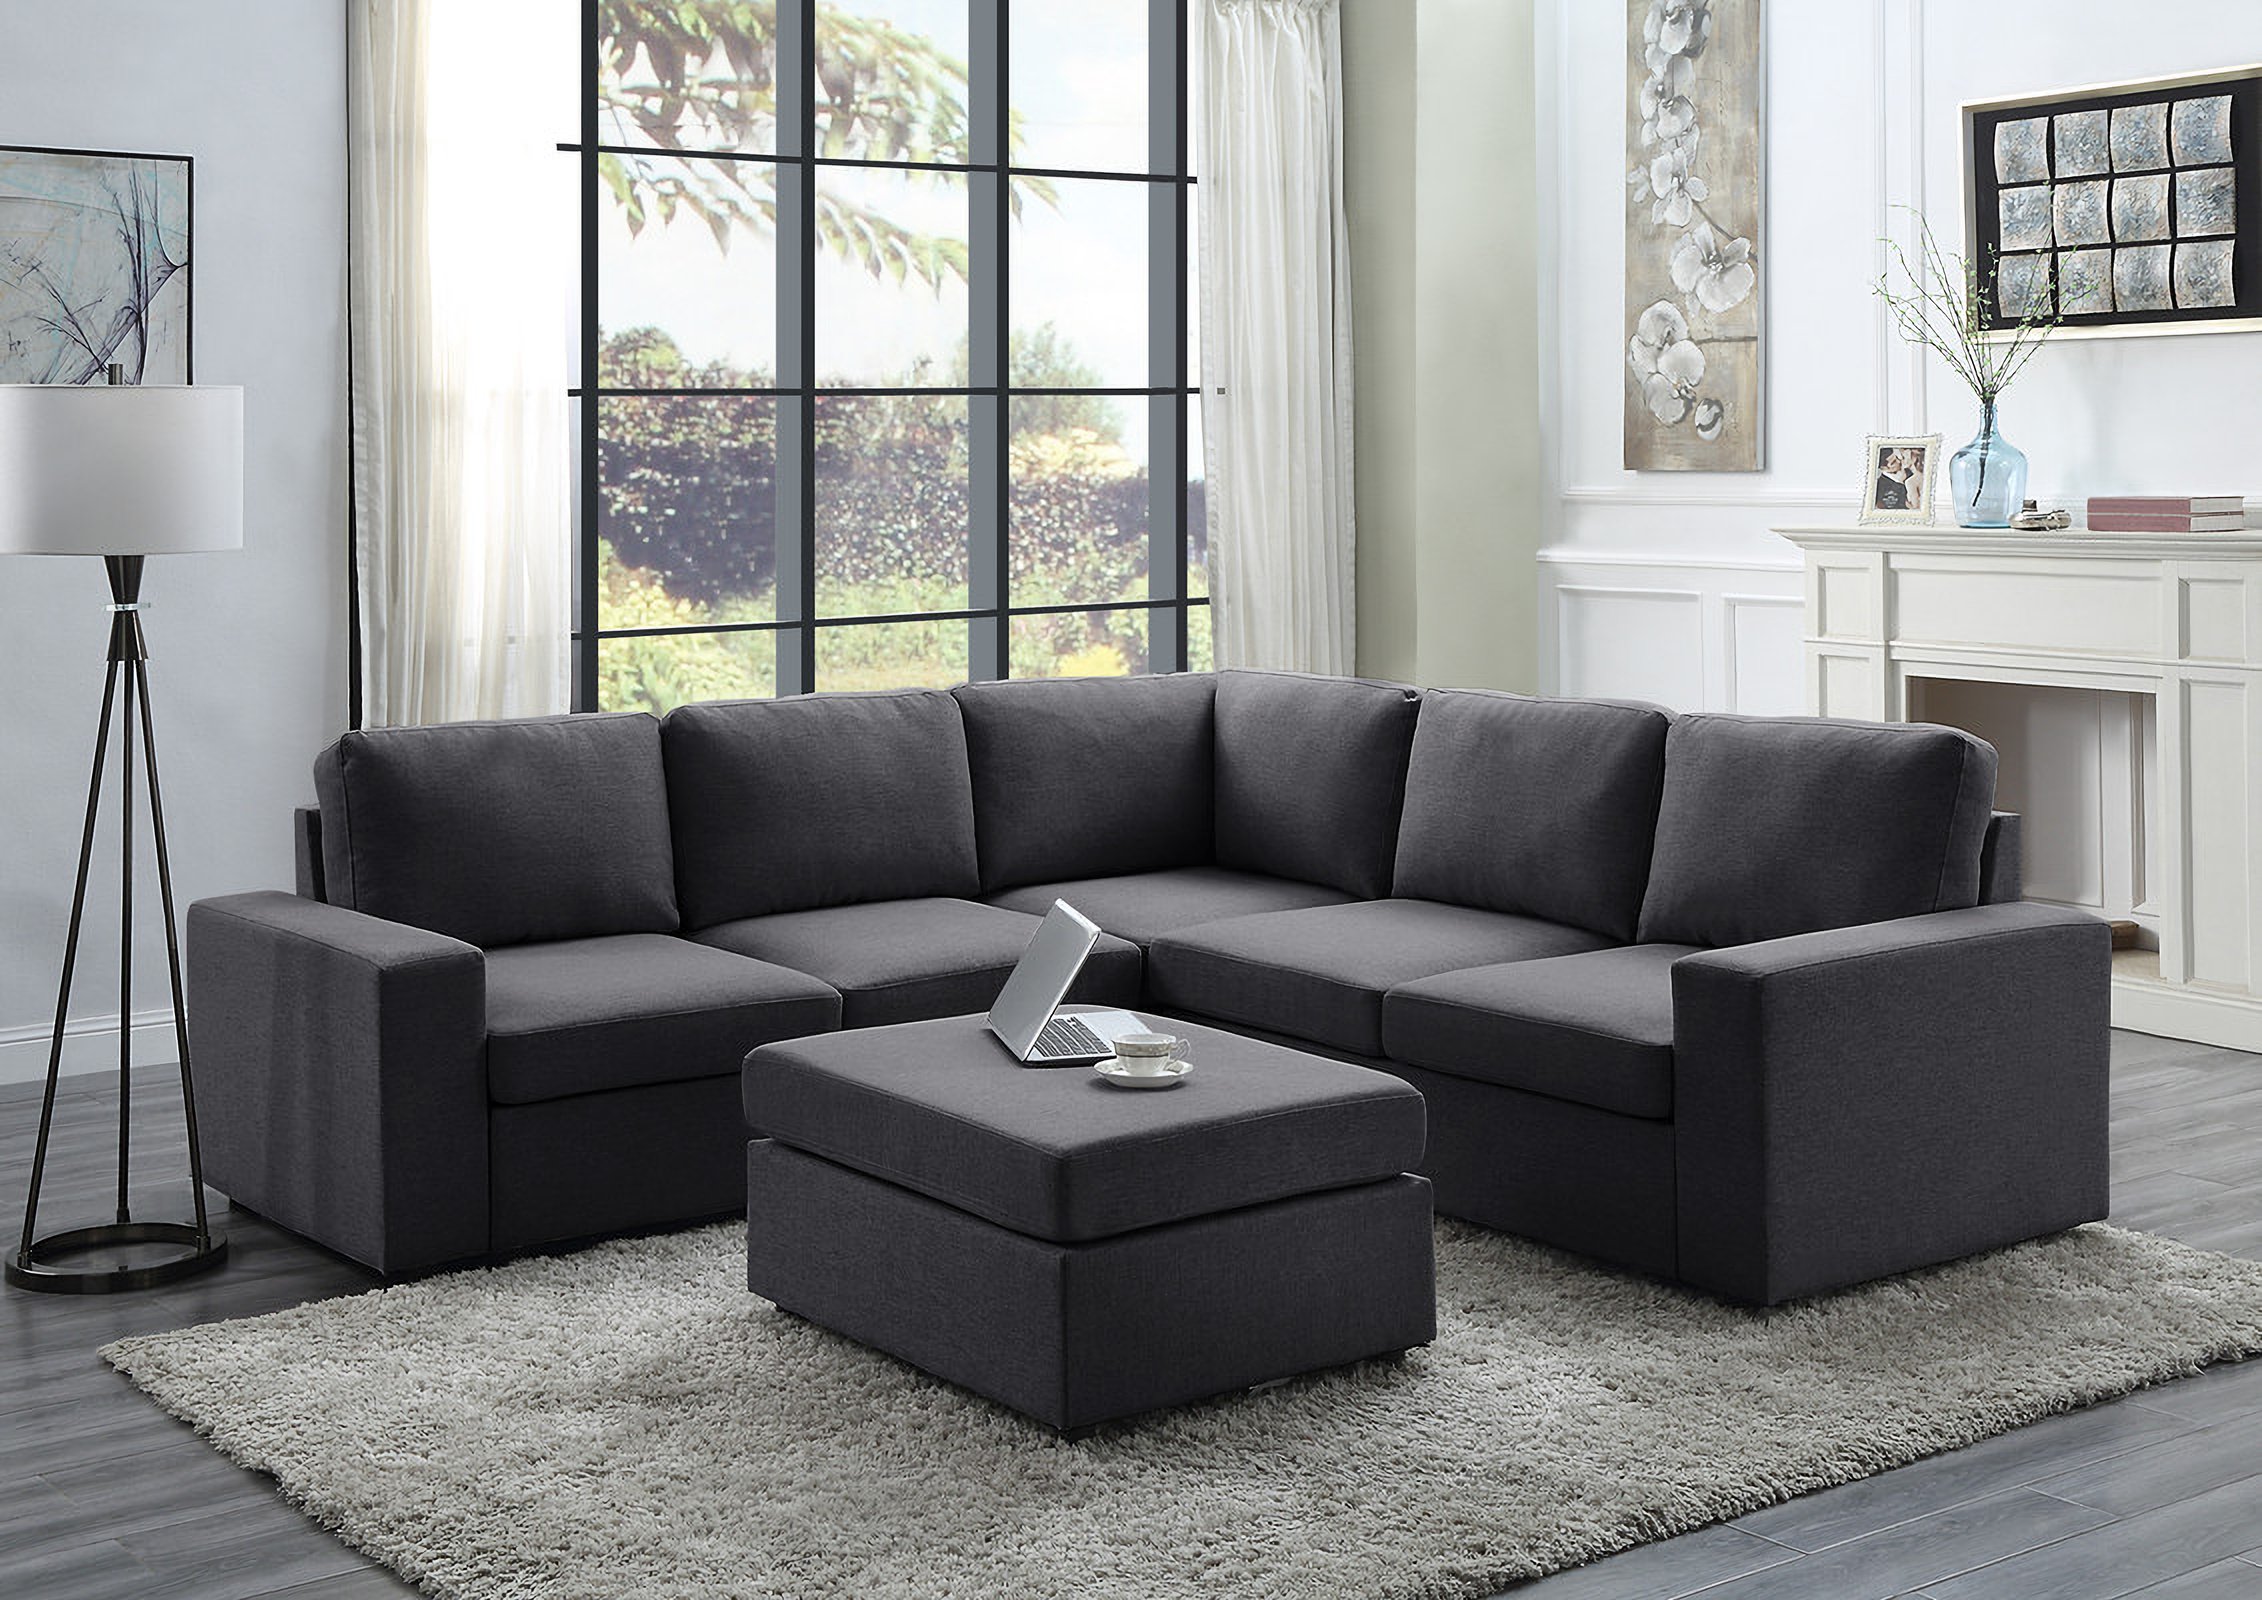 Decker Sectional Sofa With Ottoman In